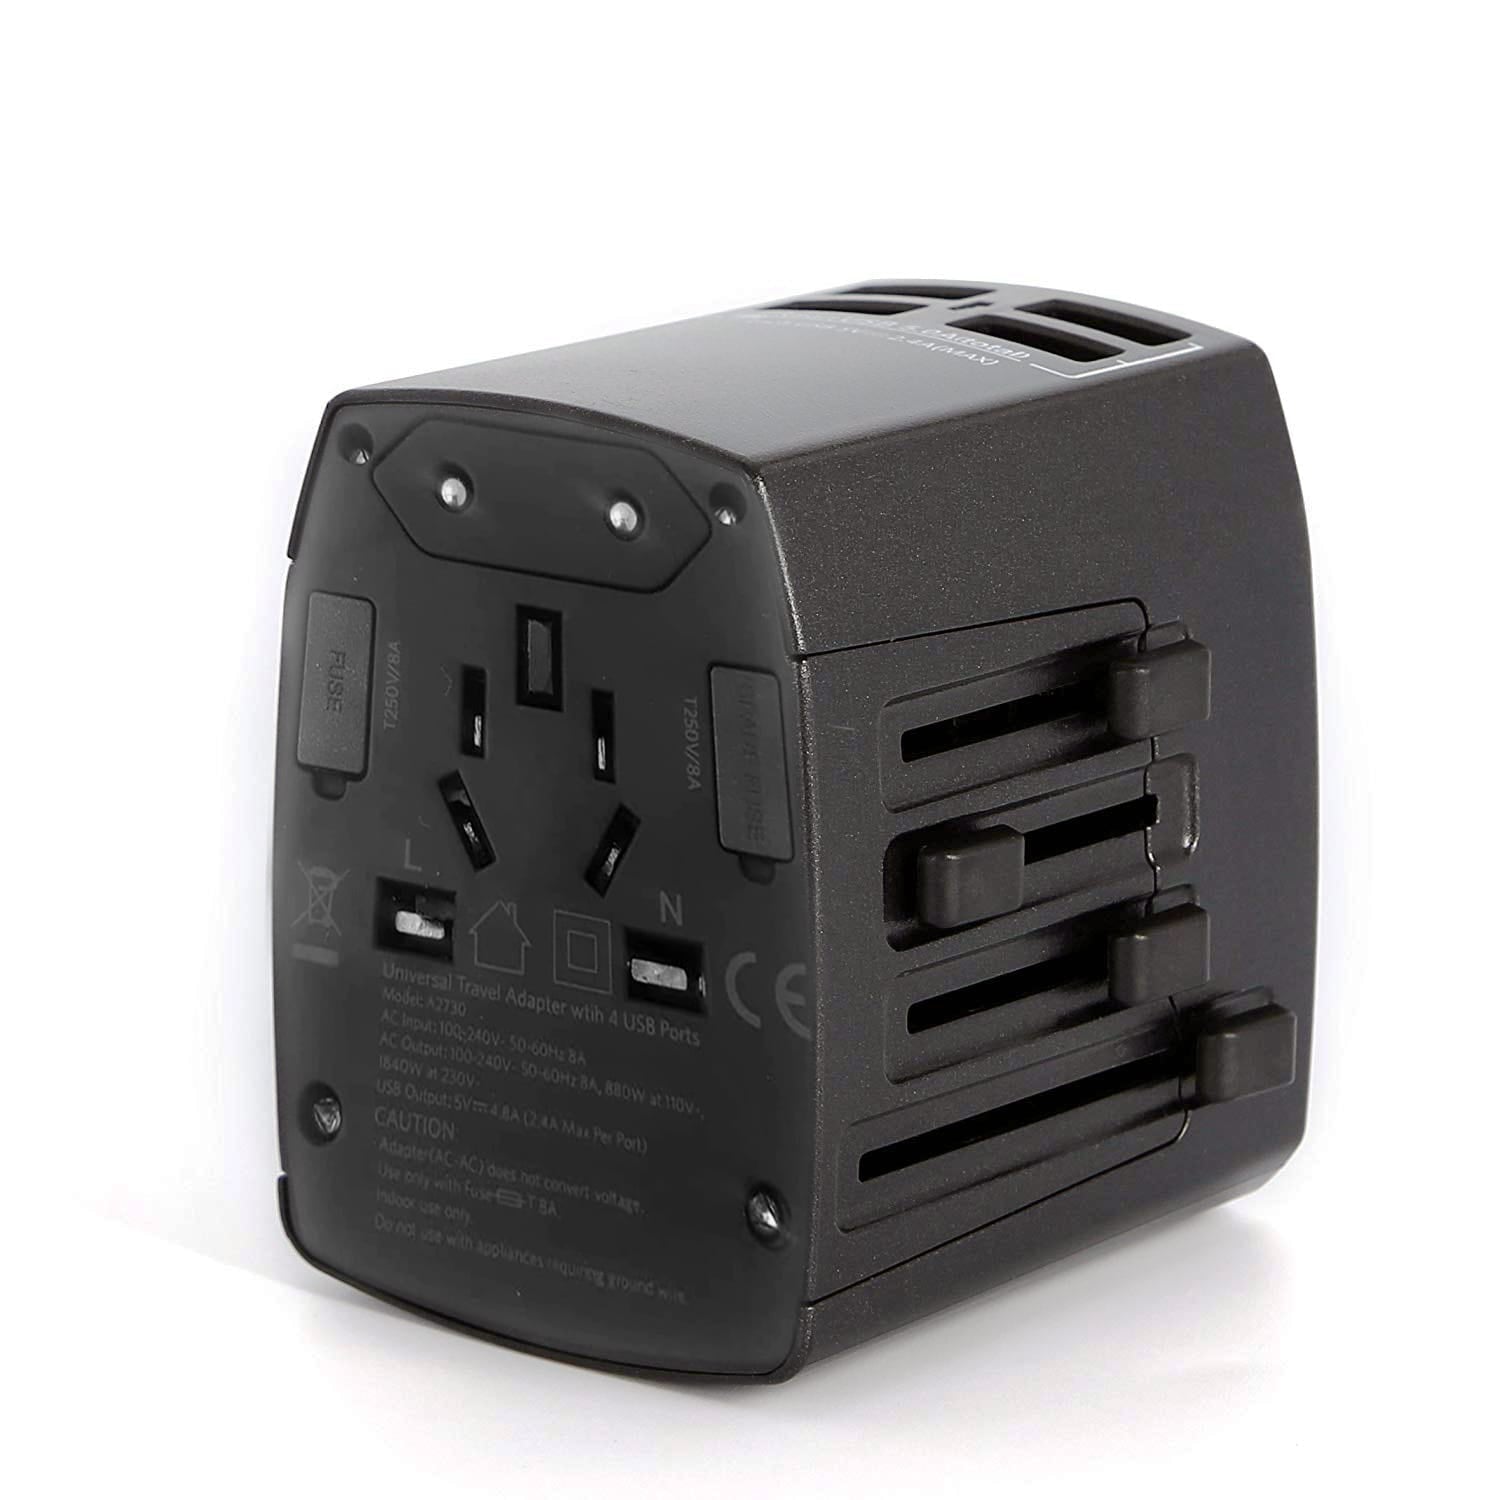 Anker Universal Travel Adapter with 4 USB Ports in black color